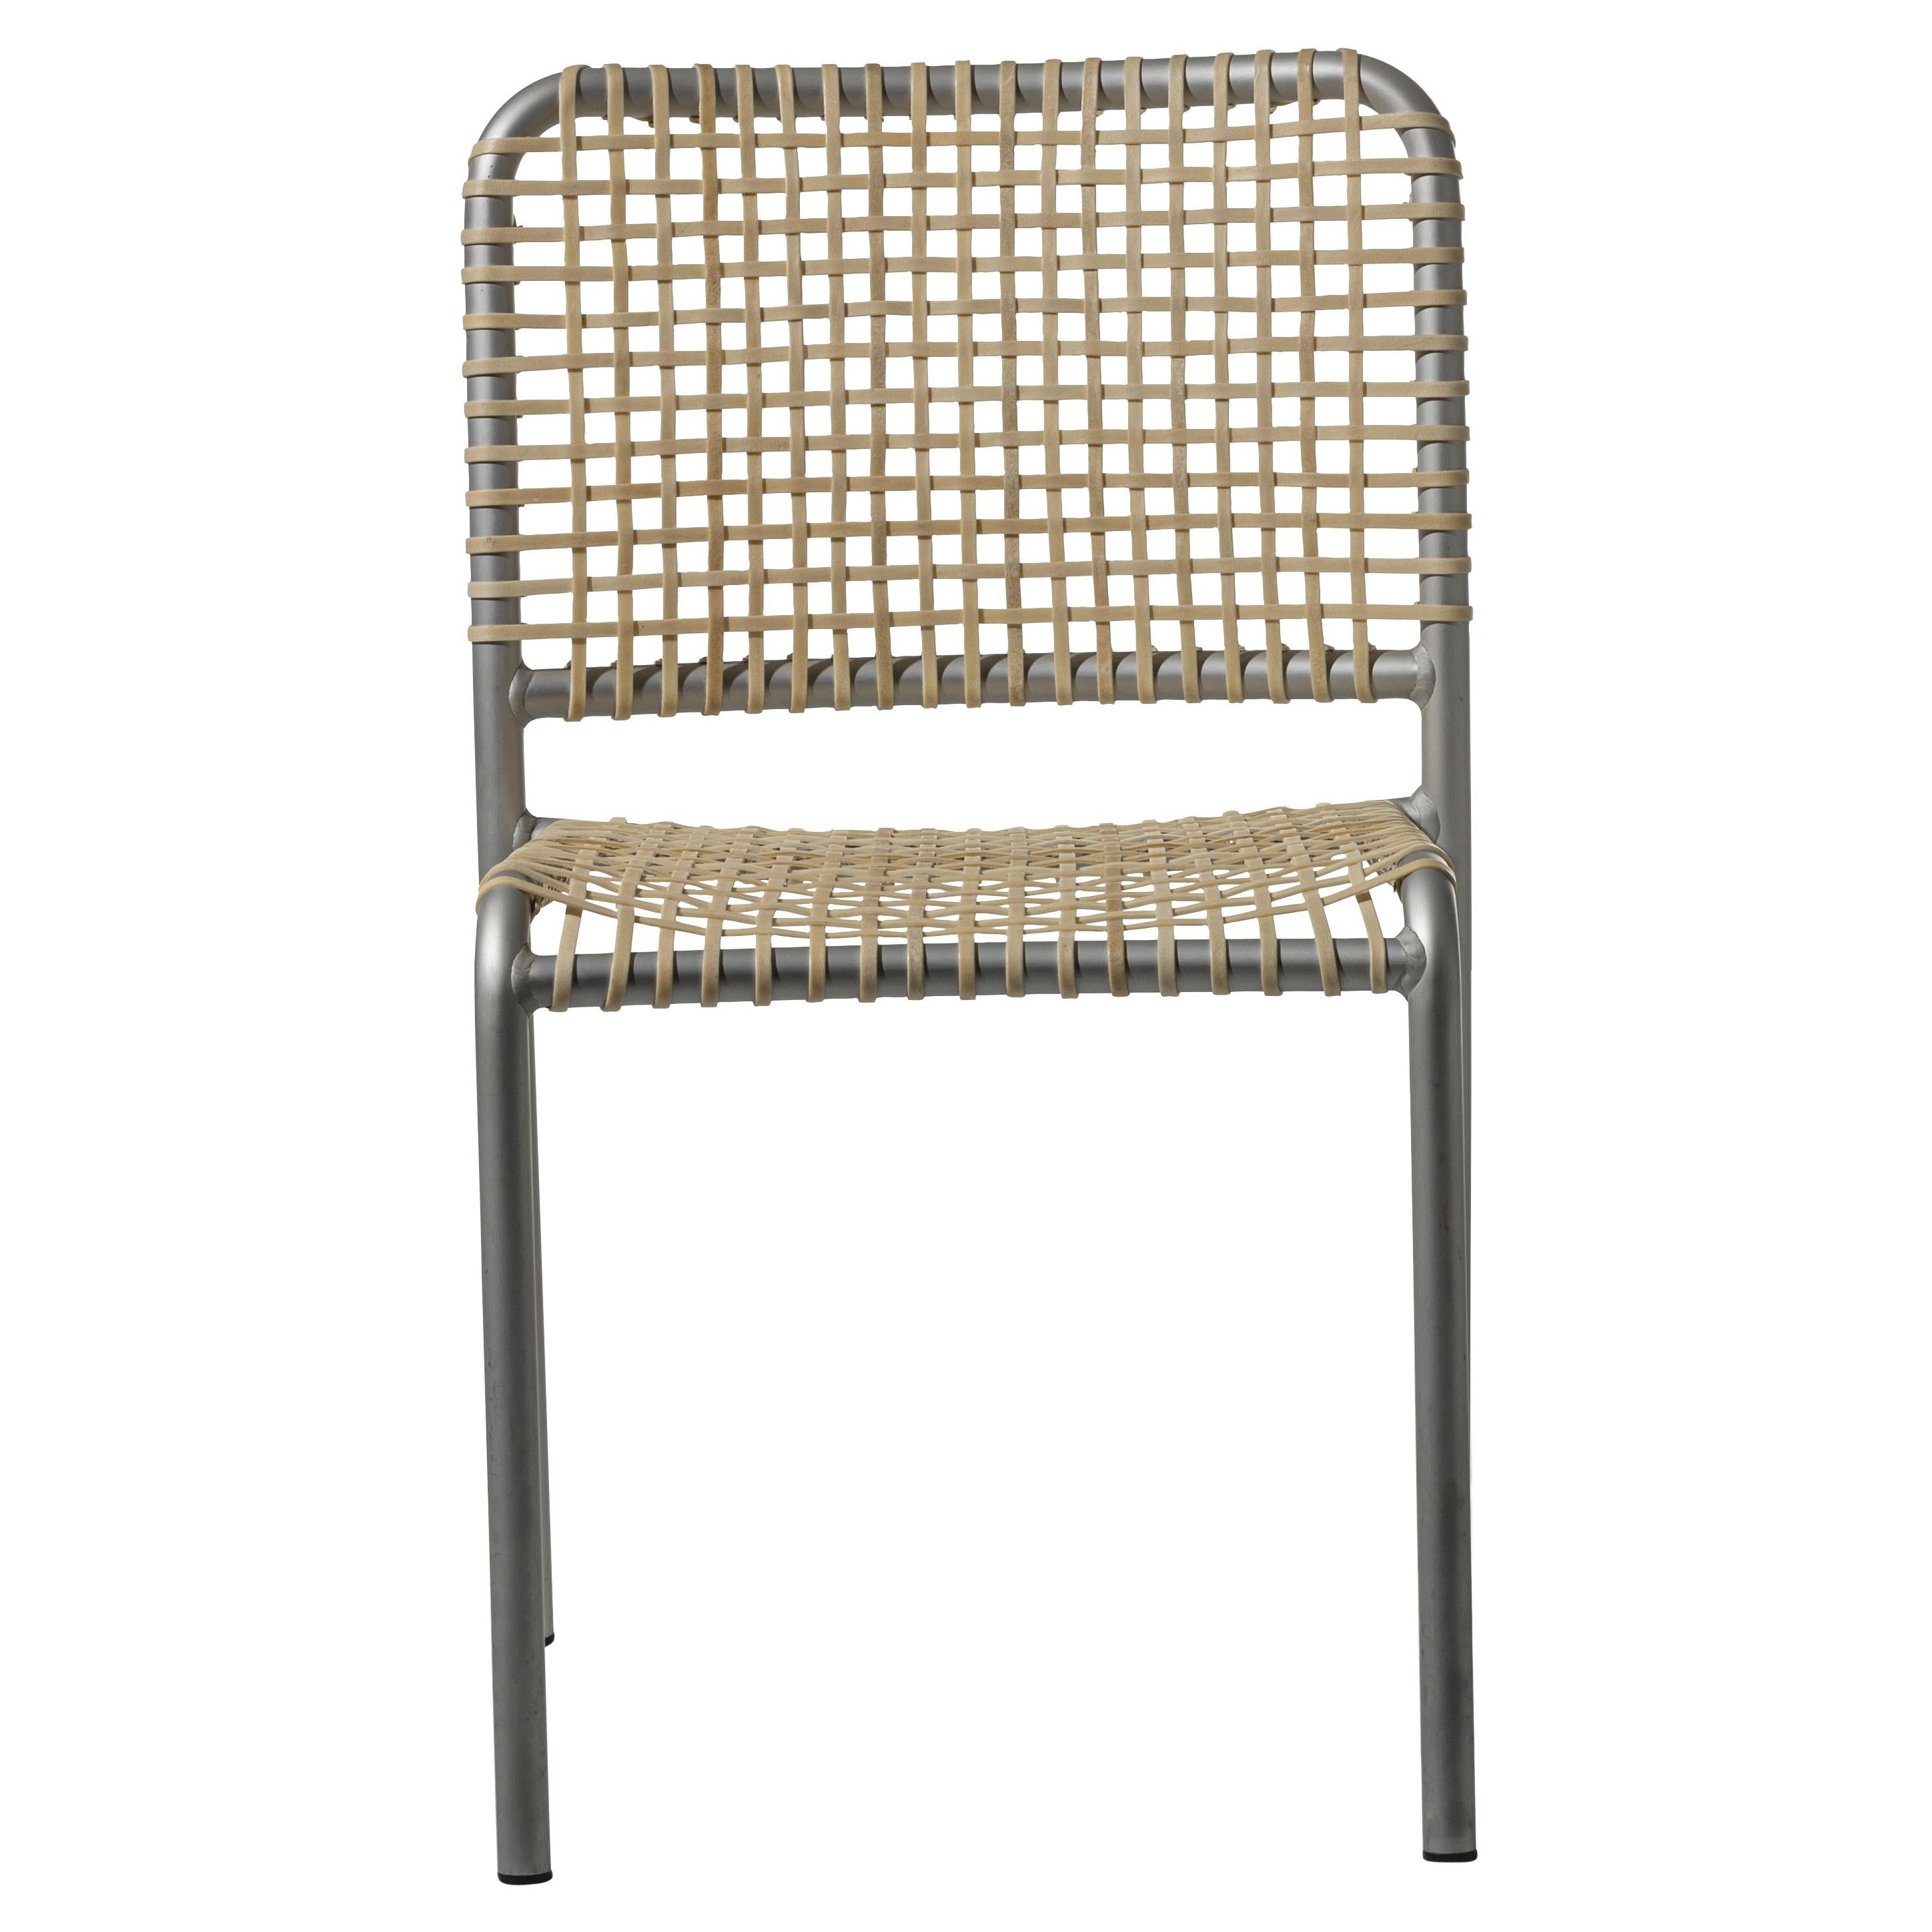 Gervasoni Allu 23 I Chair in Aluminium Frame and Woven with Natural Rawhide For Sale